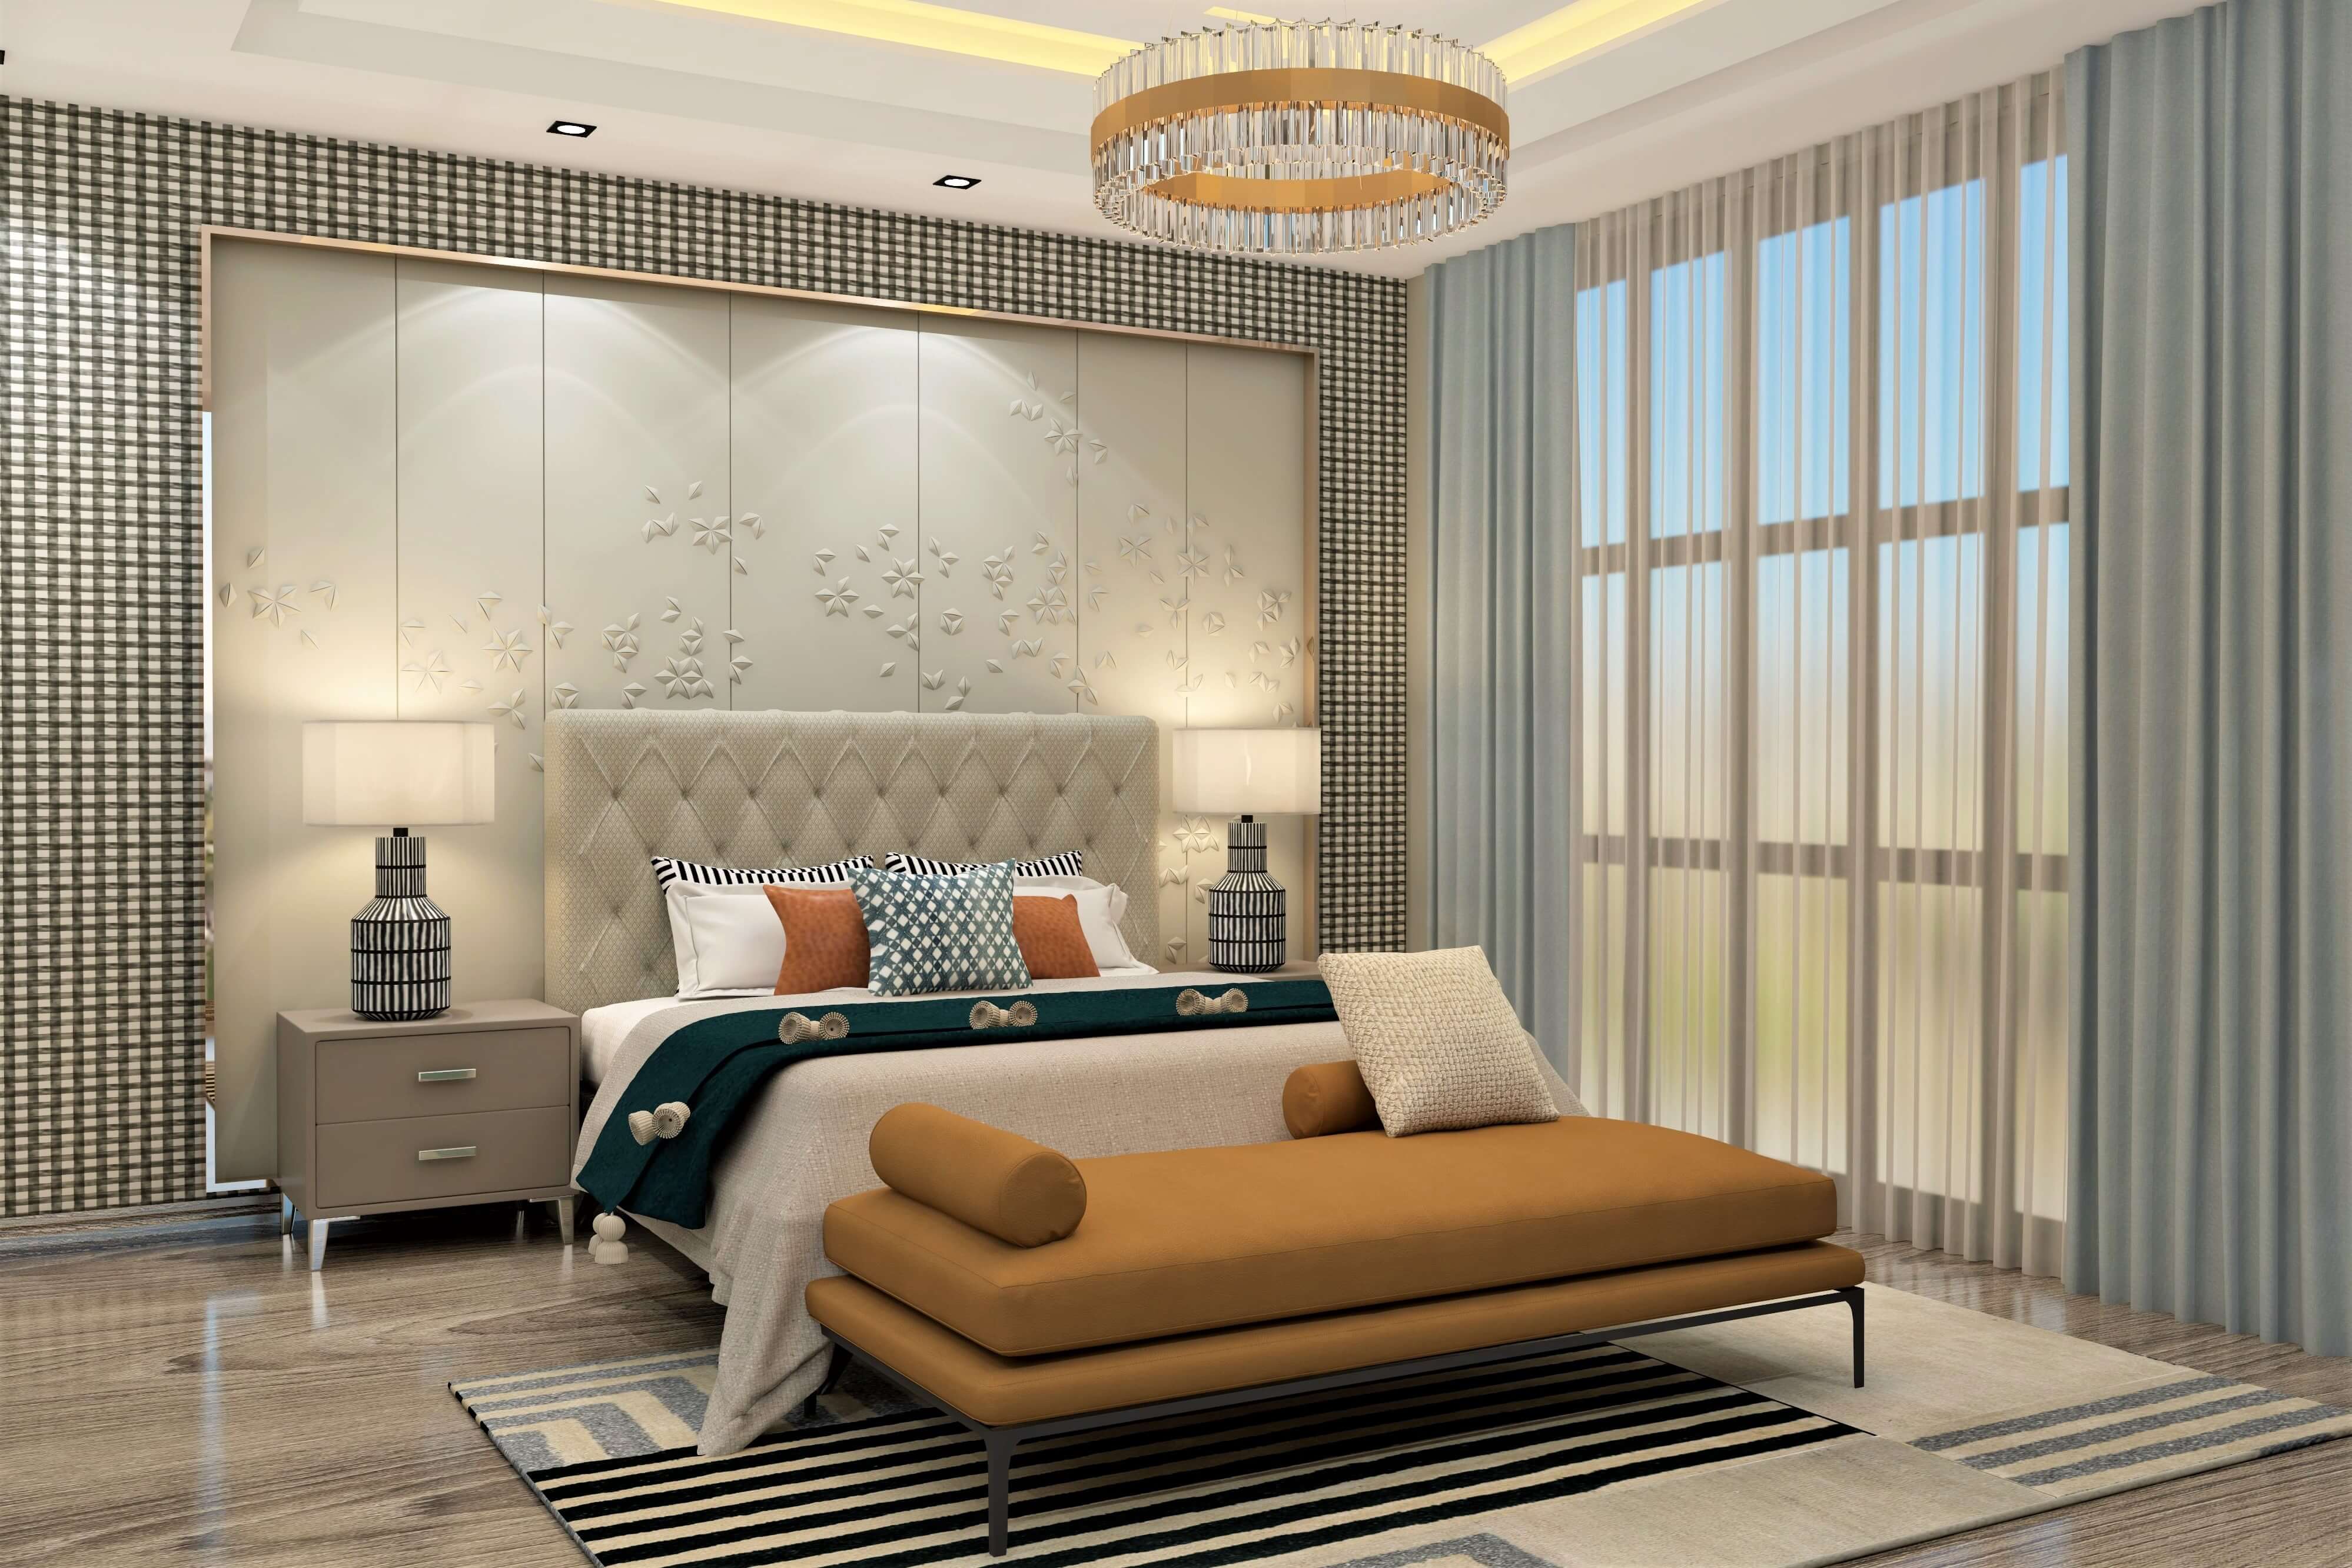 Contemporary bedroom design with a day bed - Beautiful Homes